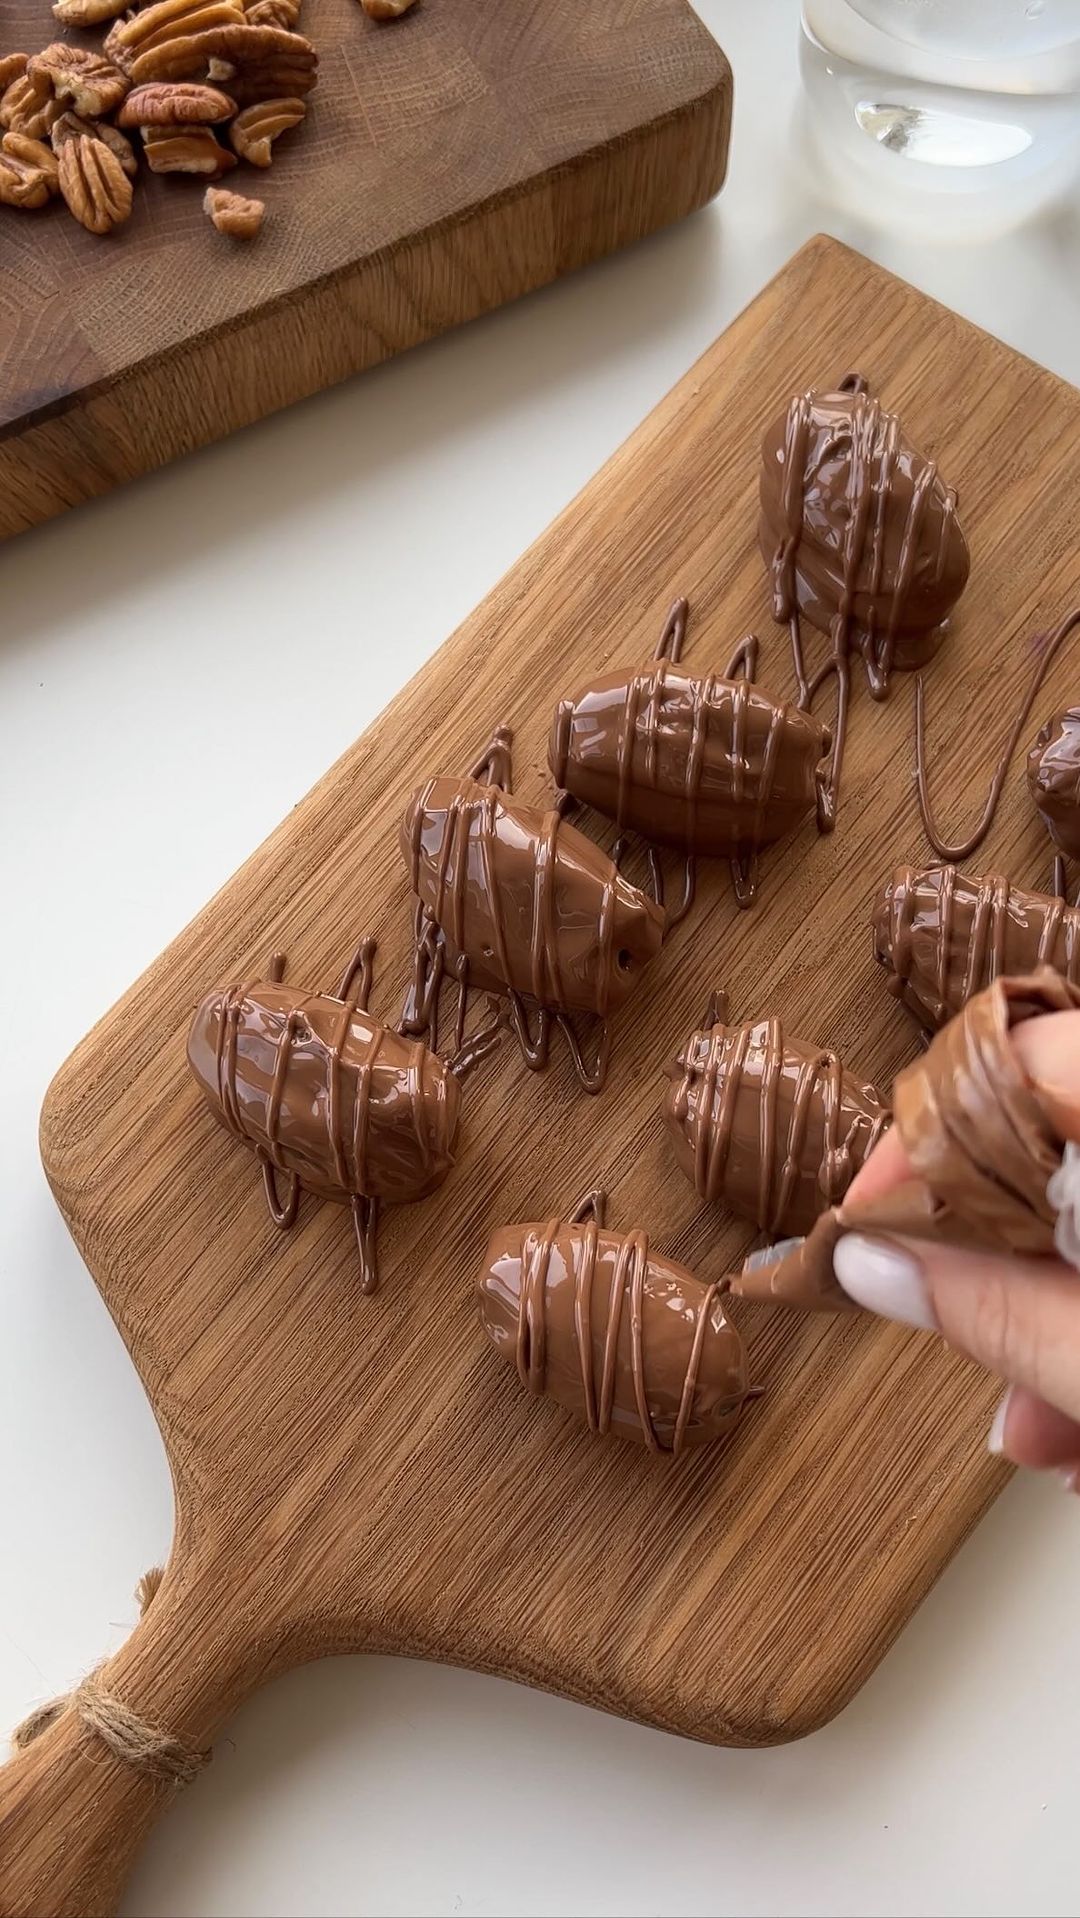 Chocolate Covered Dates with Strawberry-Banana-Nut Filling!